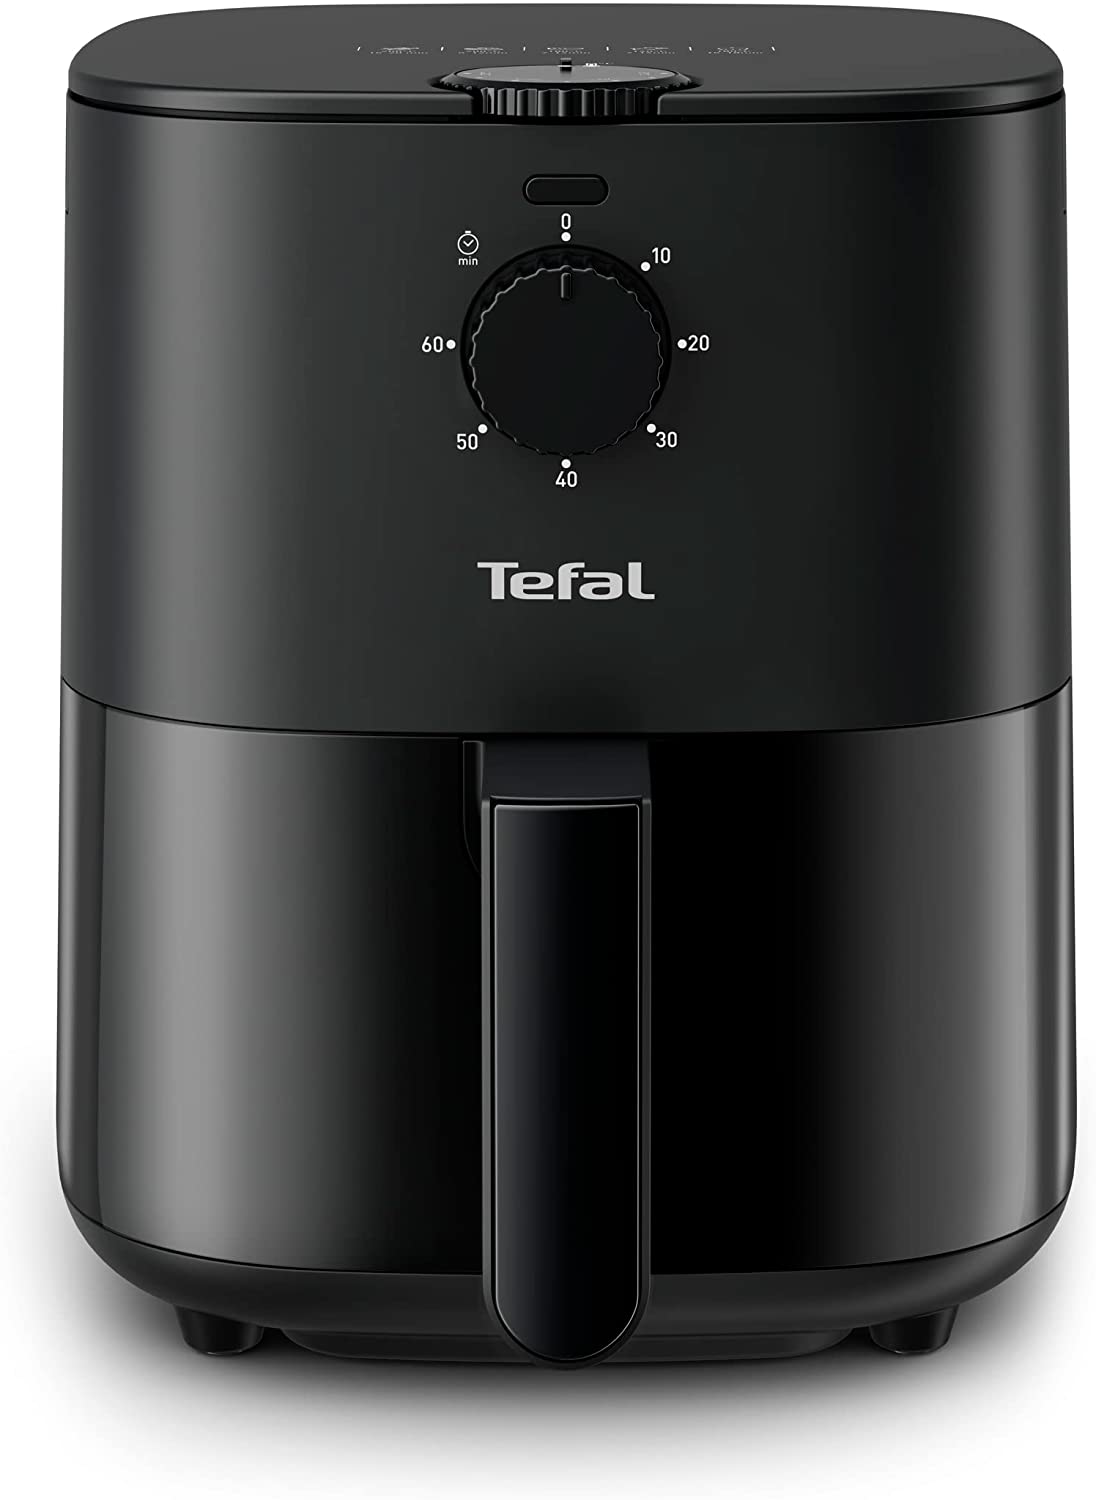 Tefal Ey1308 Easy Fry Essential Hot Air Fryer, 3.5 L Capacity Oil-Free Freyer, Compact Design, Energy Saving, Crispy Results, Healthy Cooking, Dishwasher Safe Parts